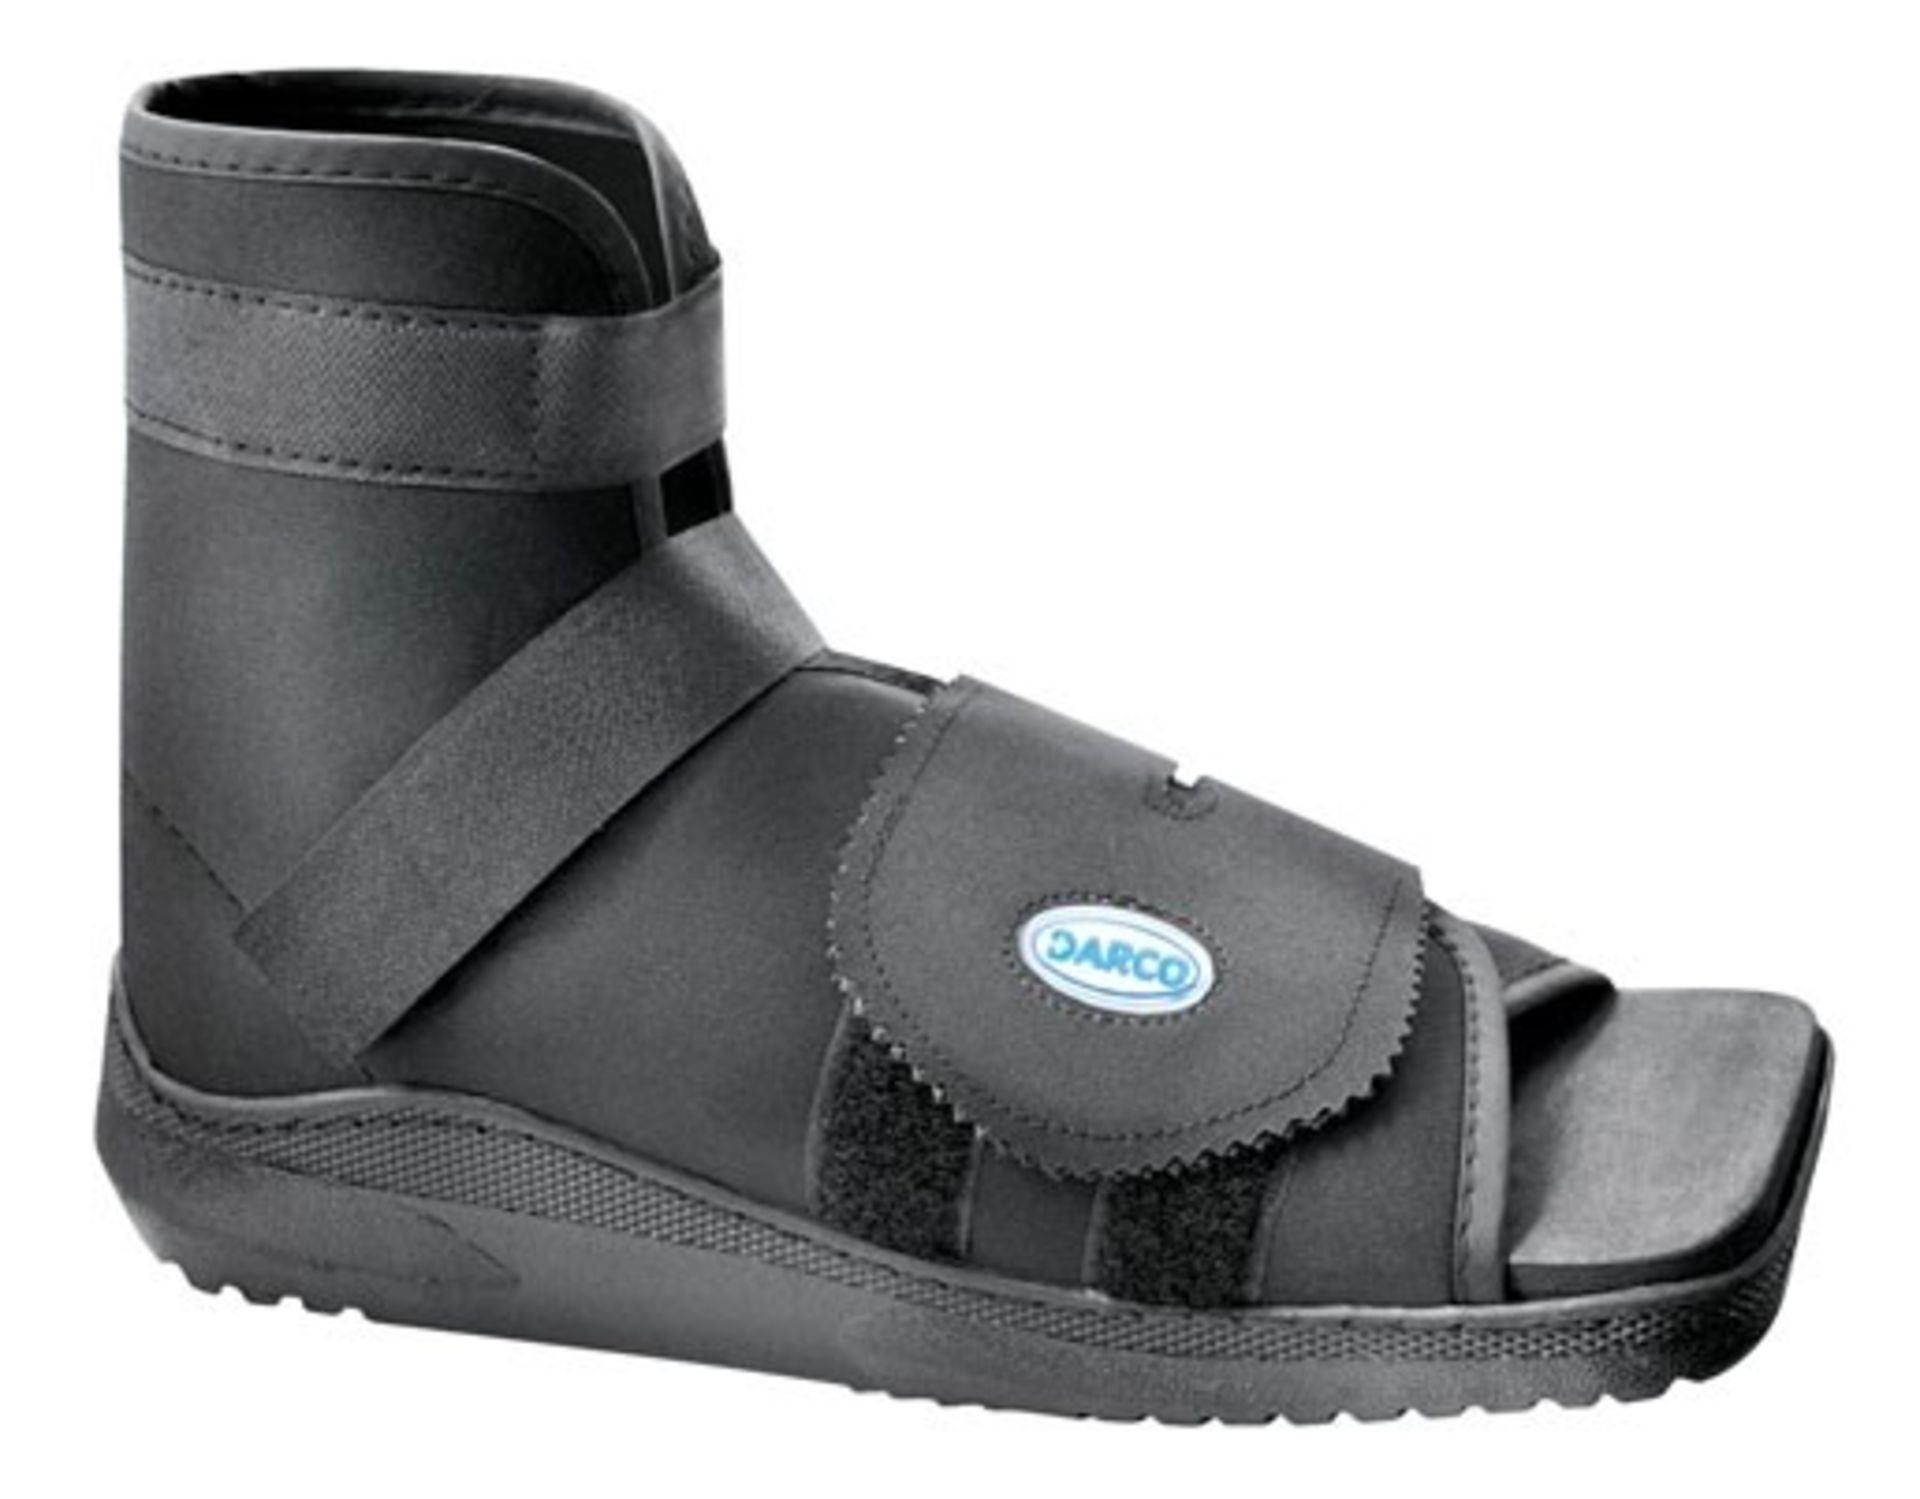 ME : 1 AS NEW BAGGED DARCO SLIMLINE CAST BOOT - ADULT EXTRA LARGE IN BLACK - SLO4BST / RRP £40.00 (